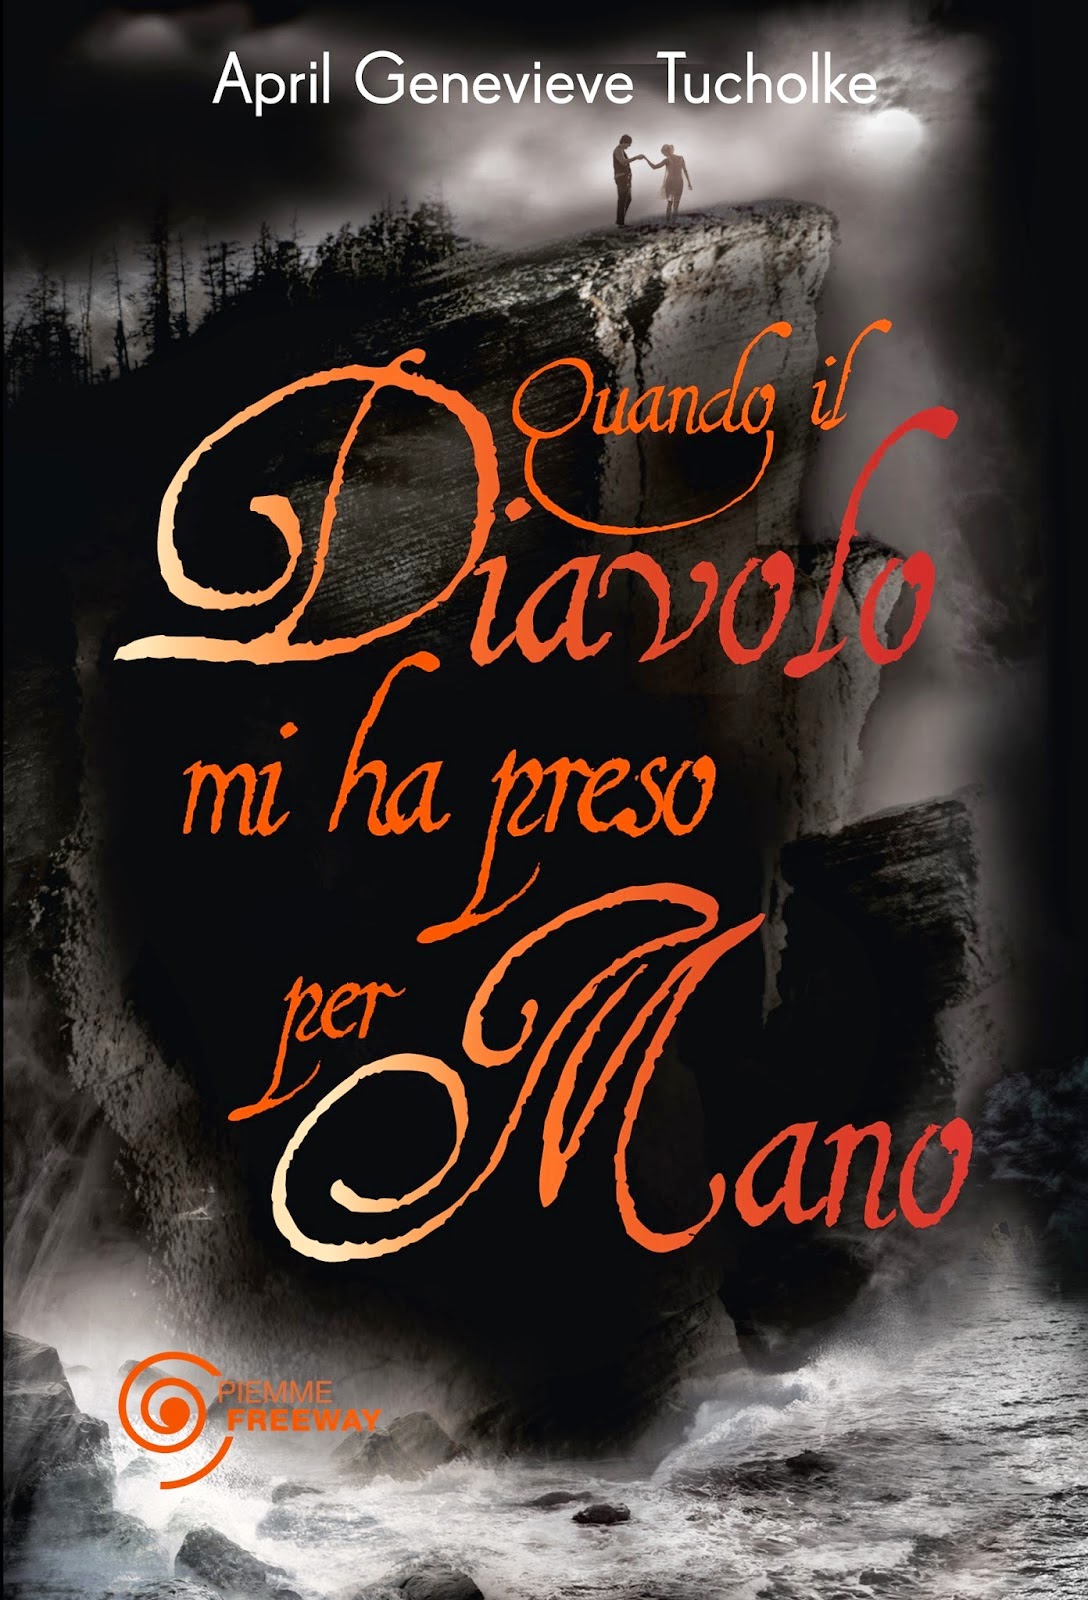 http://libricheamore.blogspot.it/2014/04/primo-giveaway.html